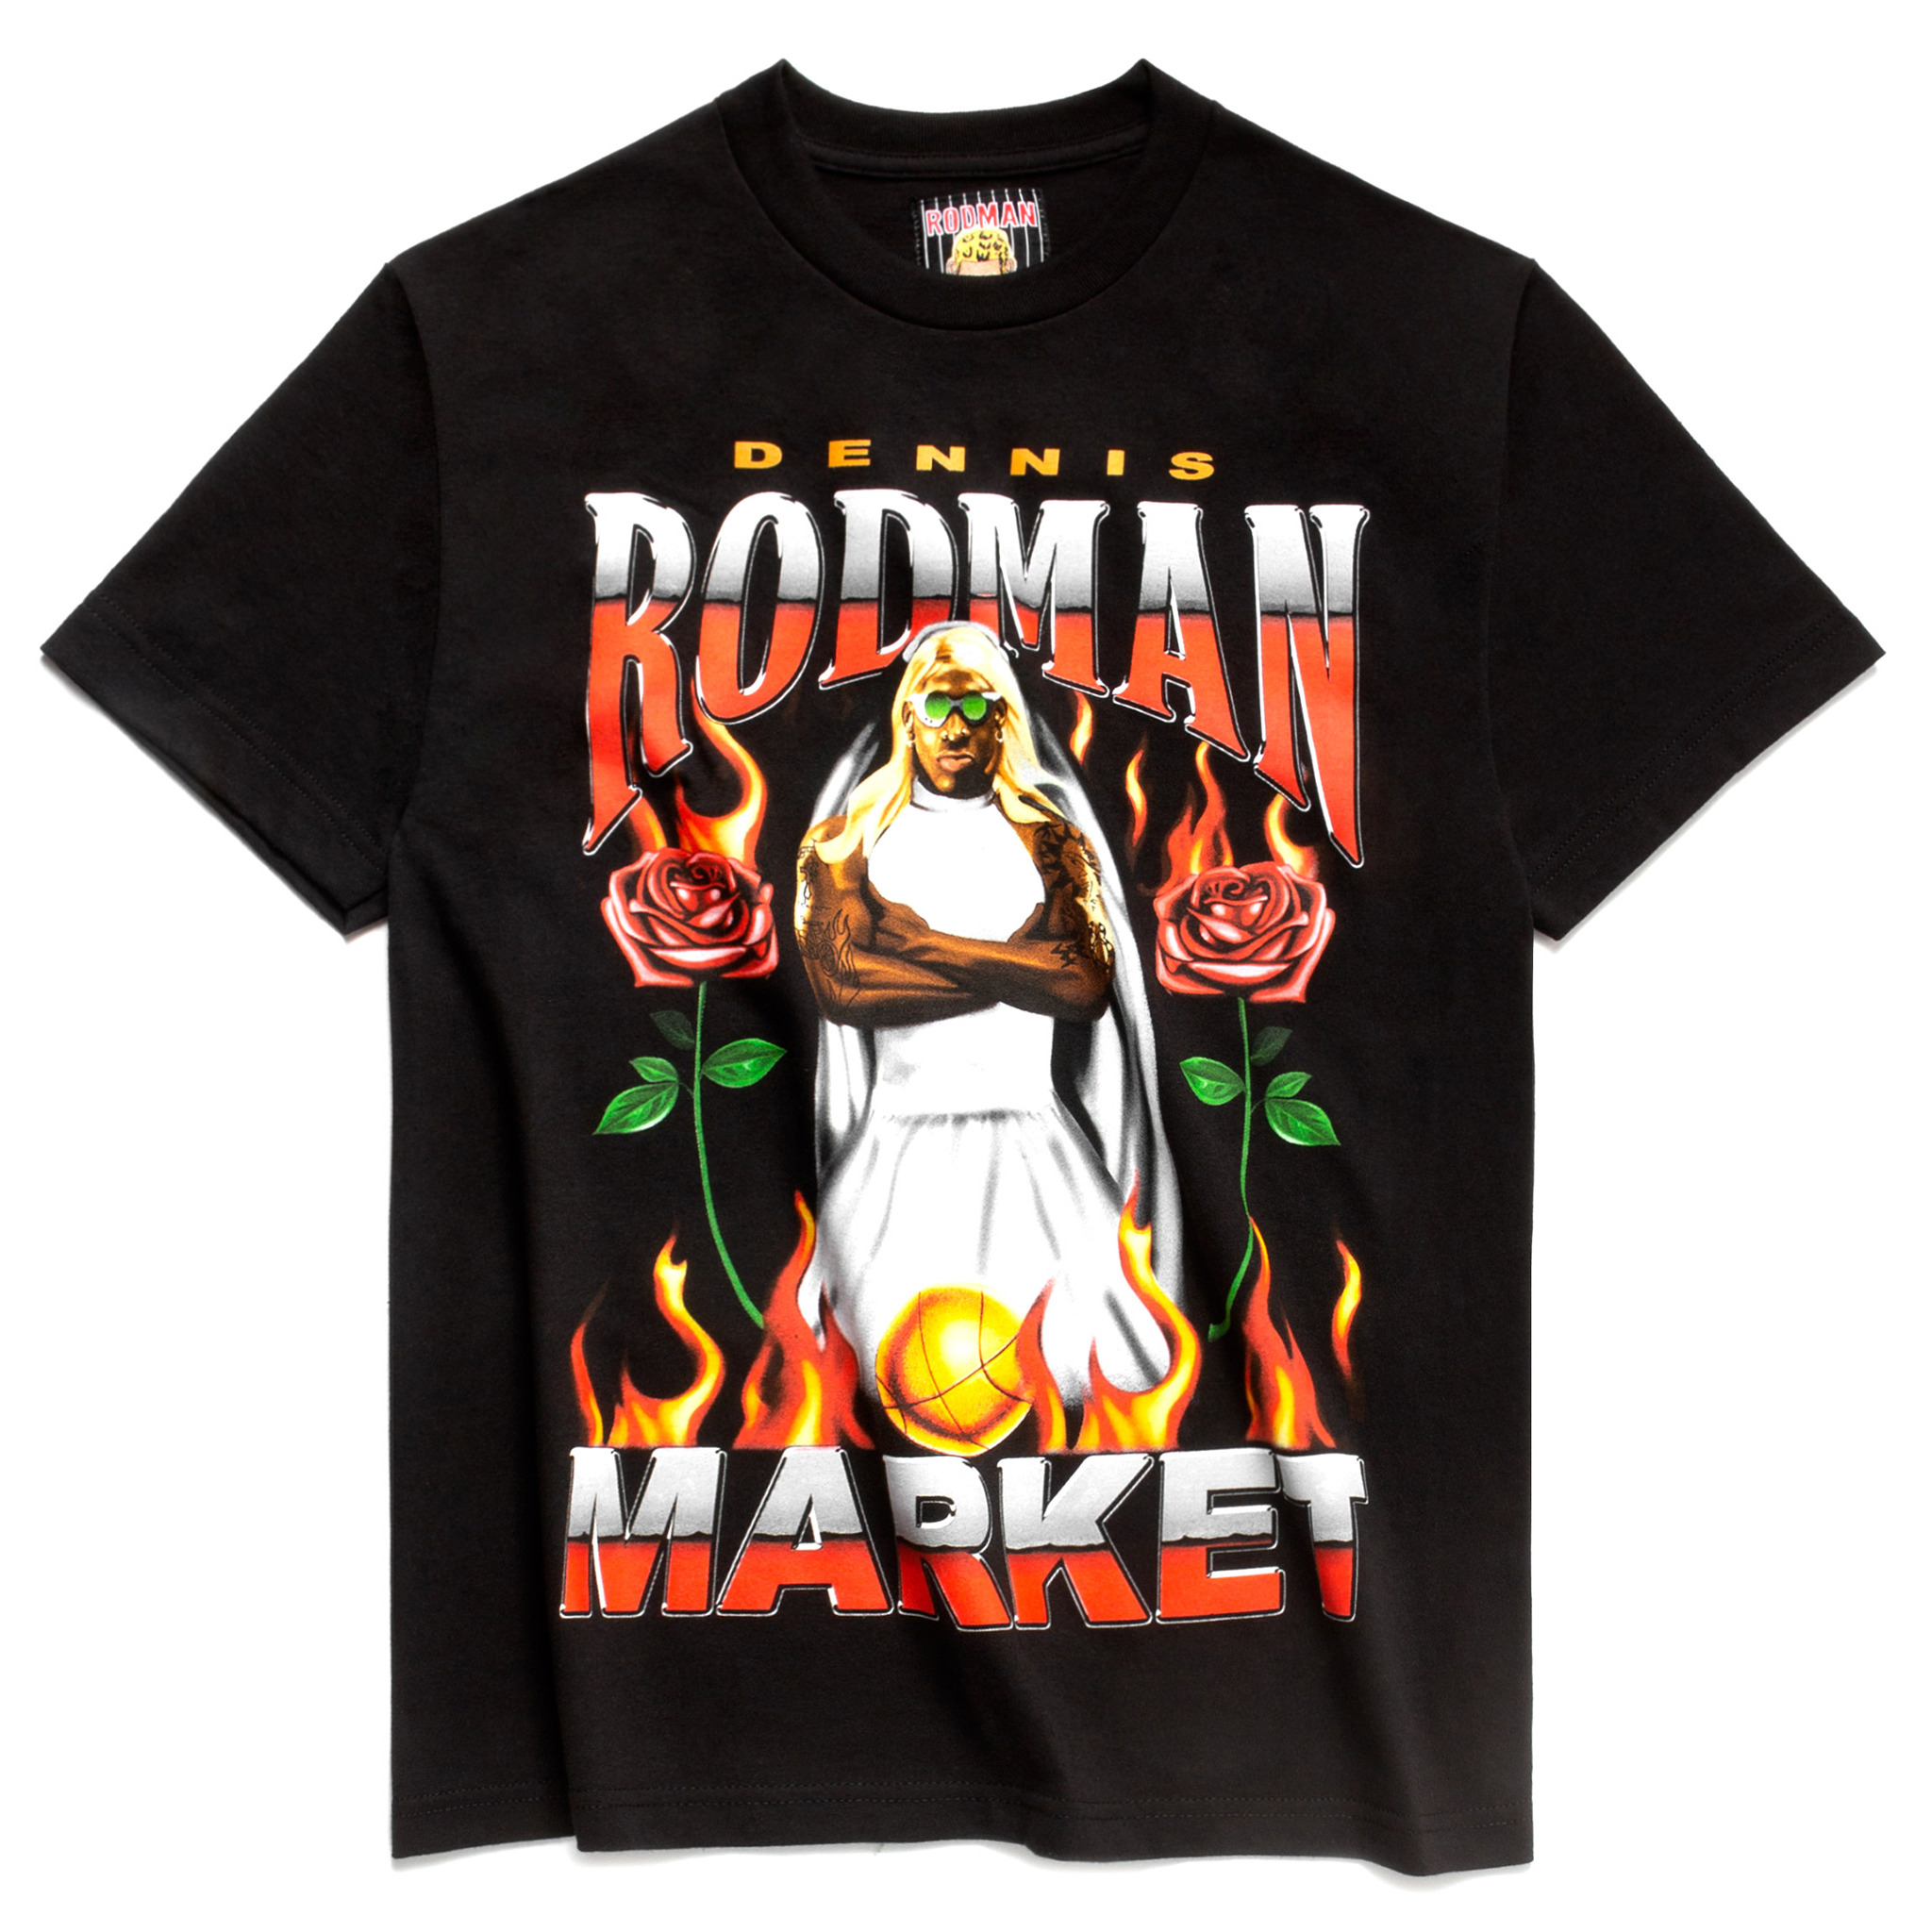 Dennis Rodman Takes On Fashion In New Collaboration With MARKET - V ...